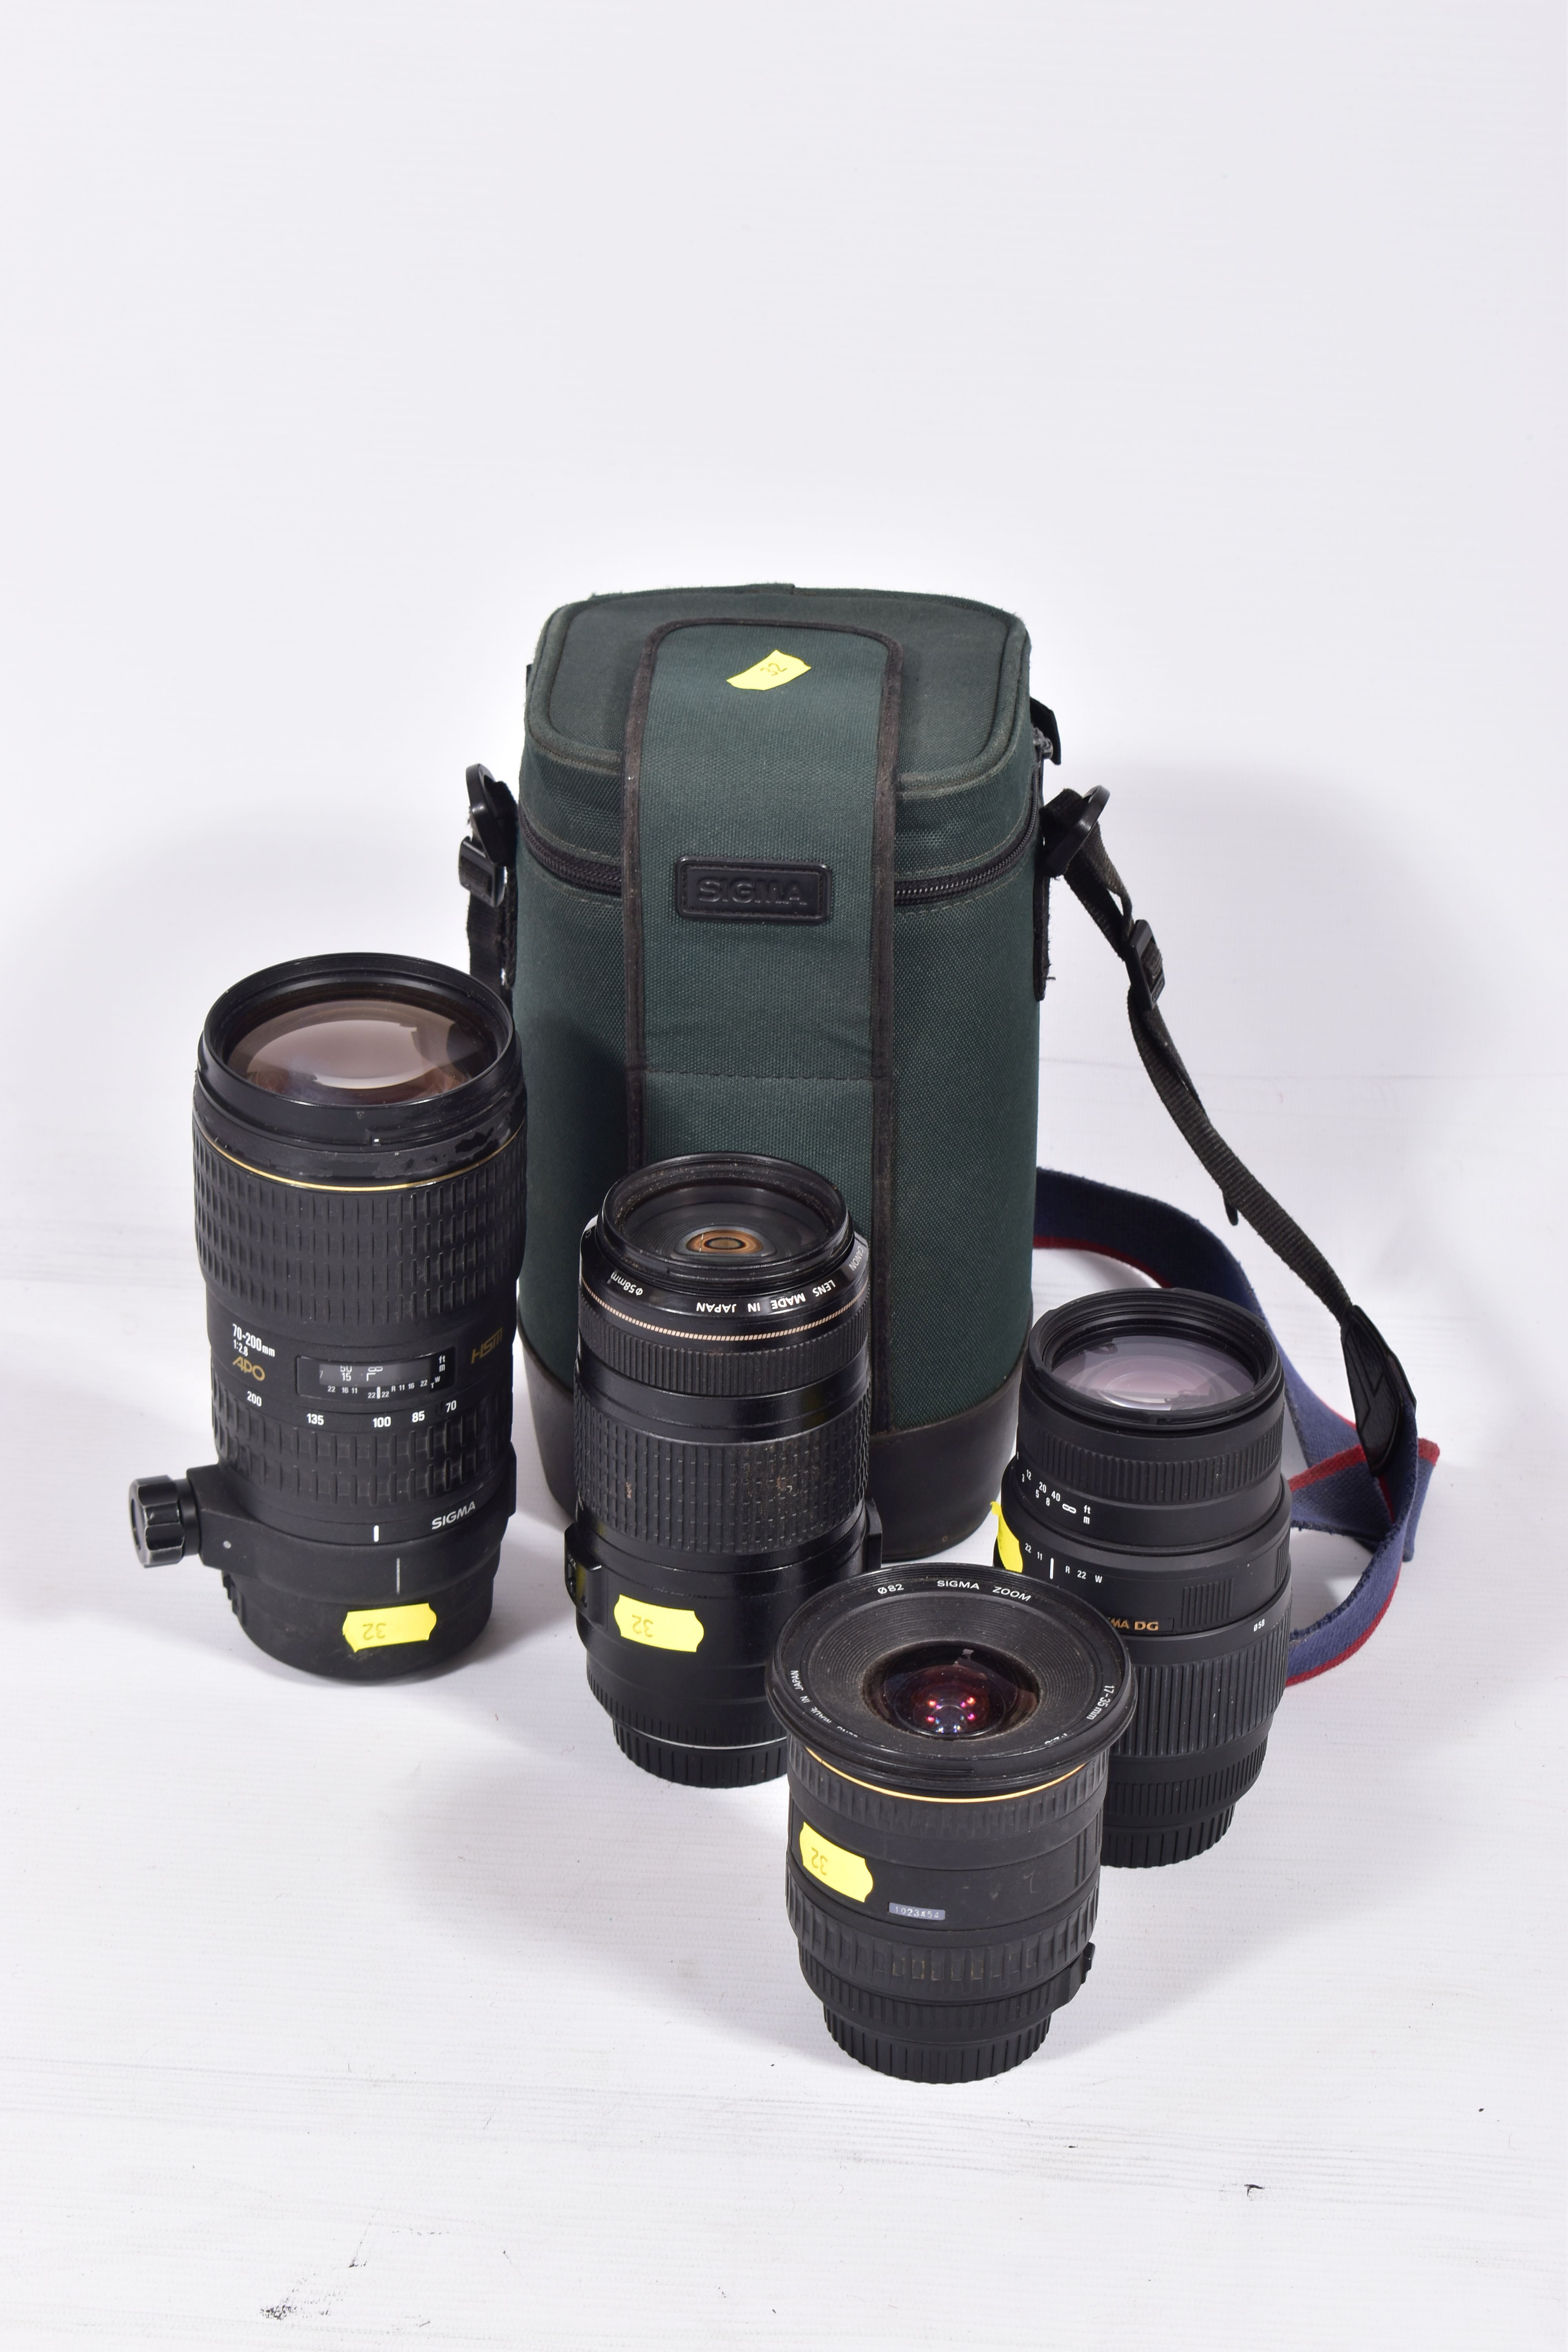 FOUR CANON AND CANON FIT ZOOM LENSES comprising of a Canon 70-300 f4 EF IS USM lens, a Sigma 70-